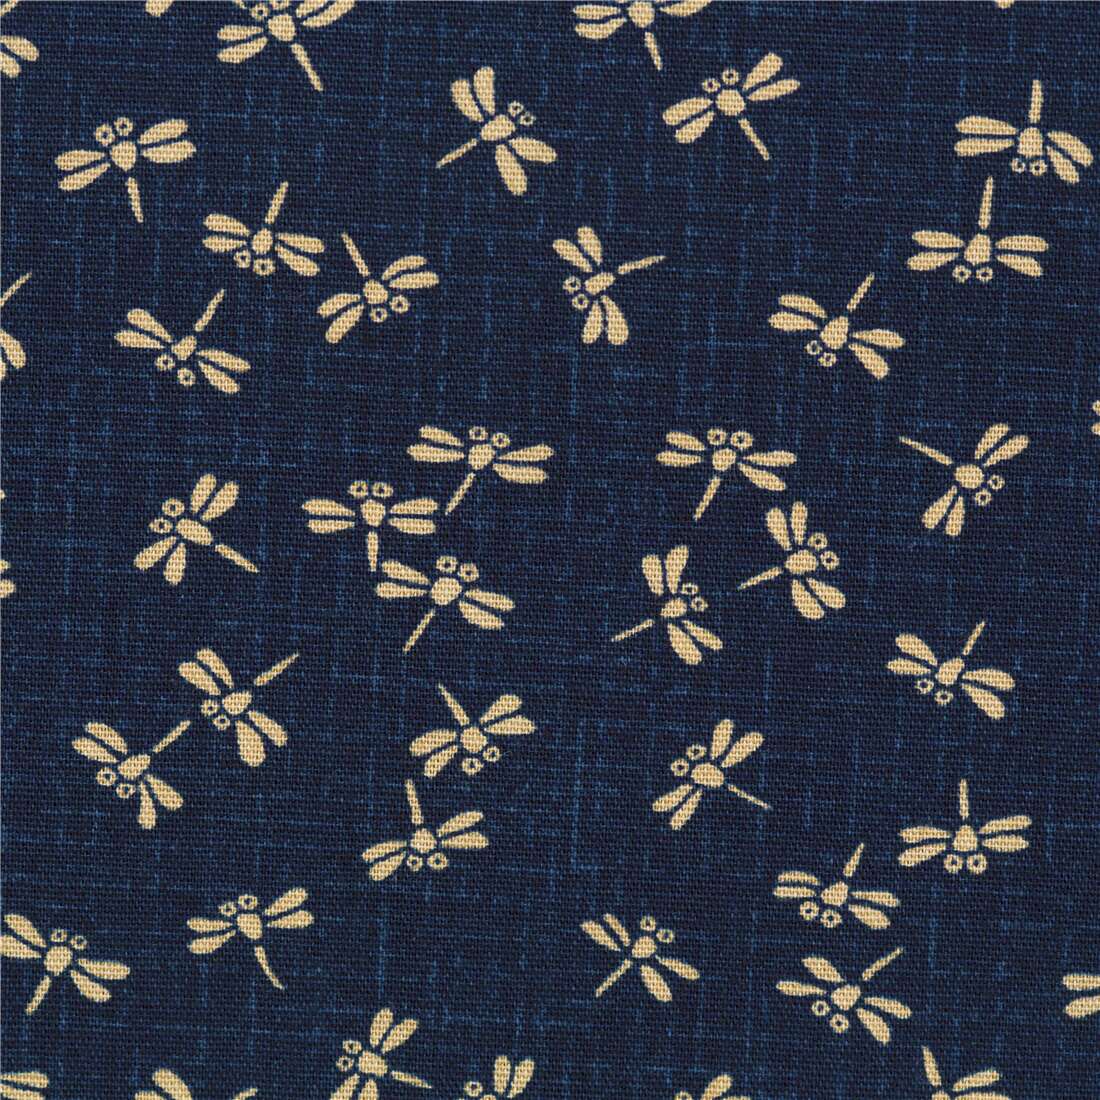 110CM*45CM navy blue dragonfly Kimono Japanese flower cotton Fabric  Patchwork cloth Sewing Clothing crafts DIY Material cloth